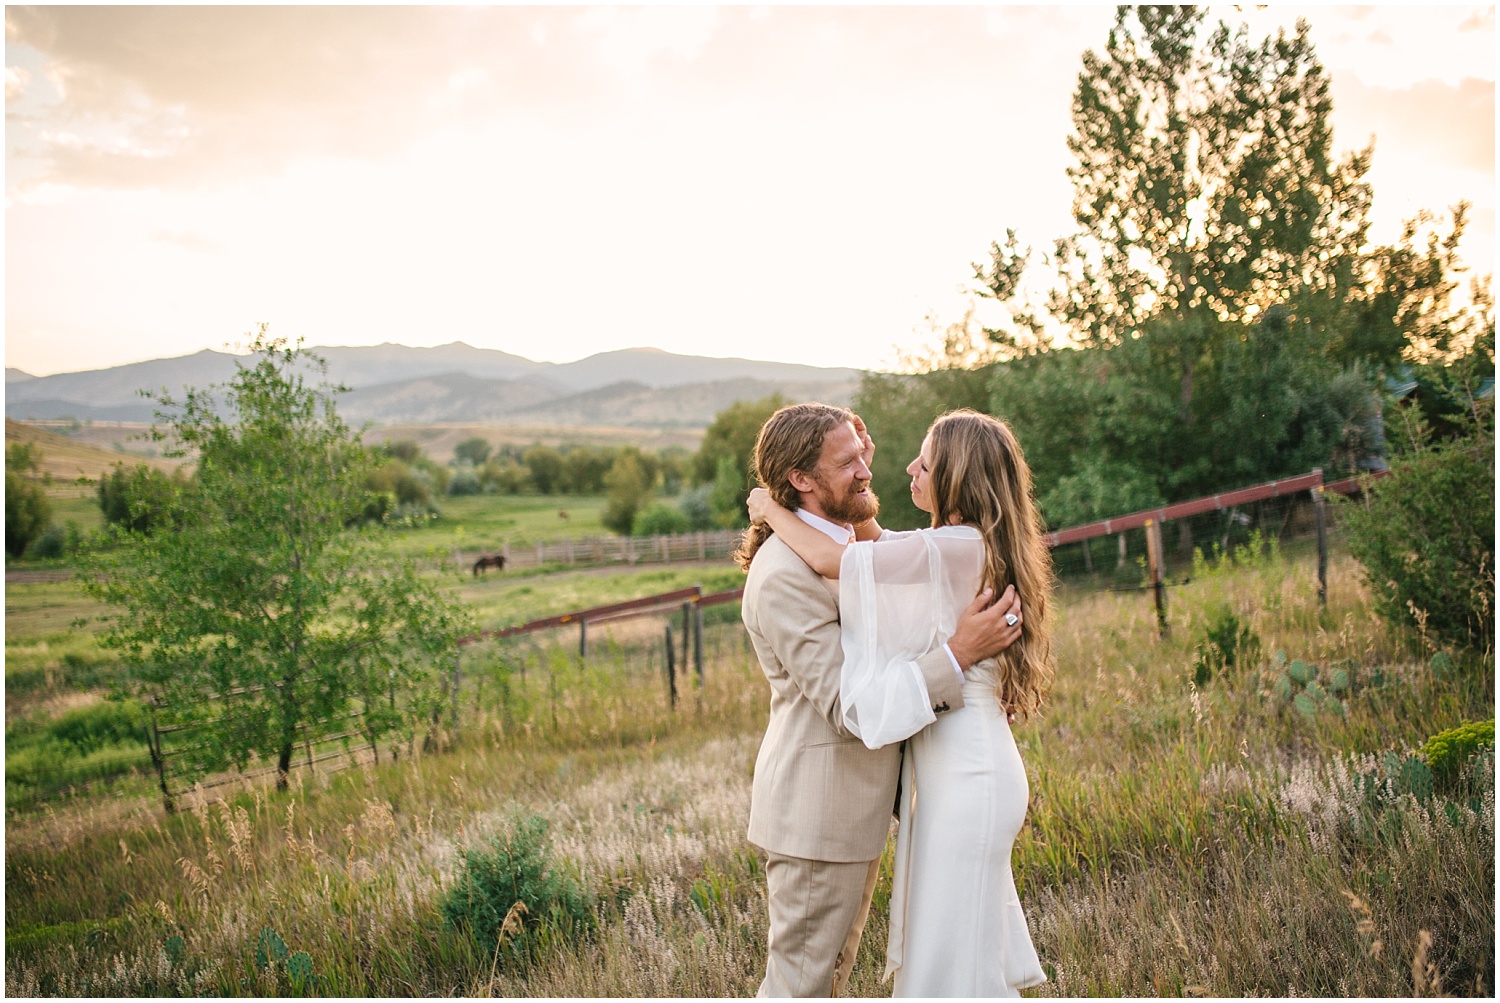 Bride and groom at sunset at Lone Hawk Farm wedding in Longmont Colorado